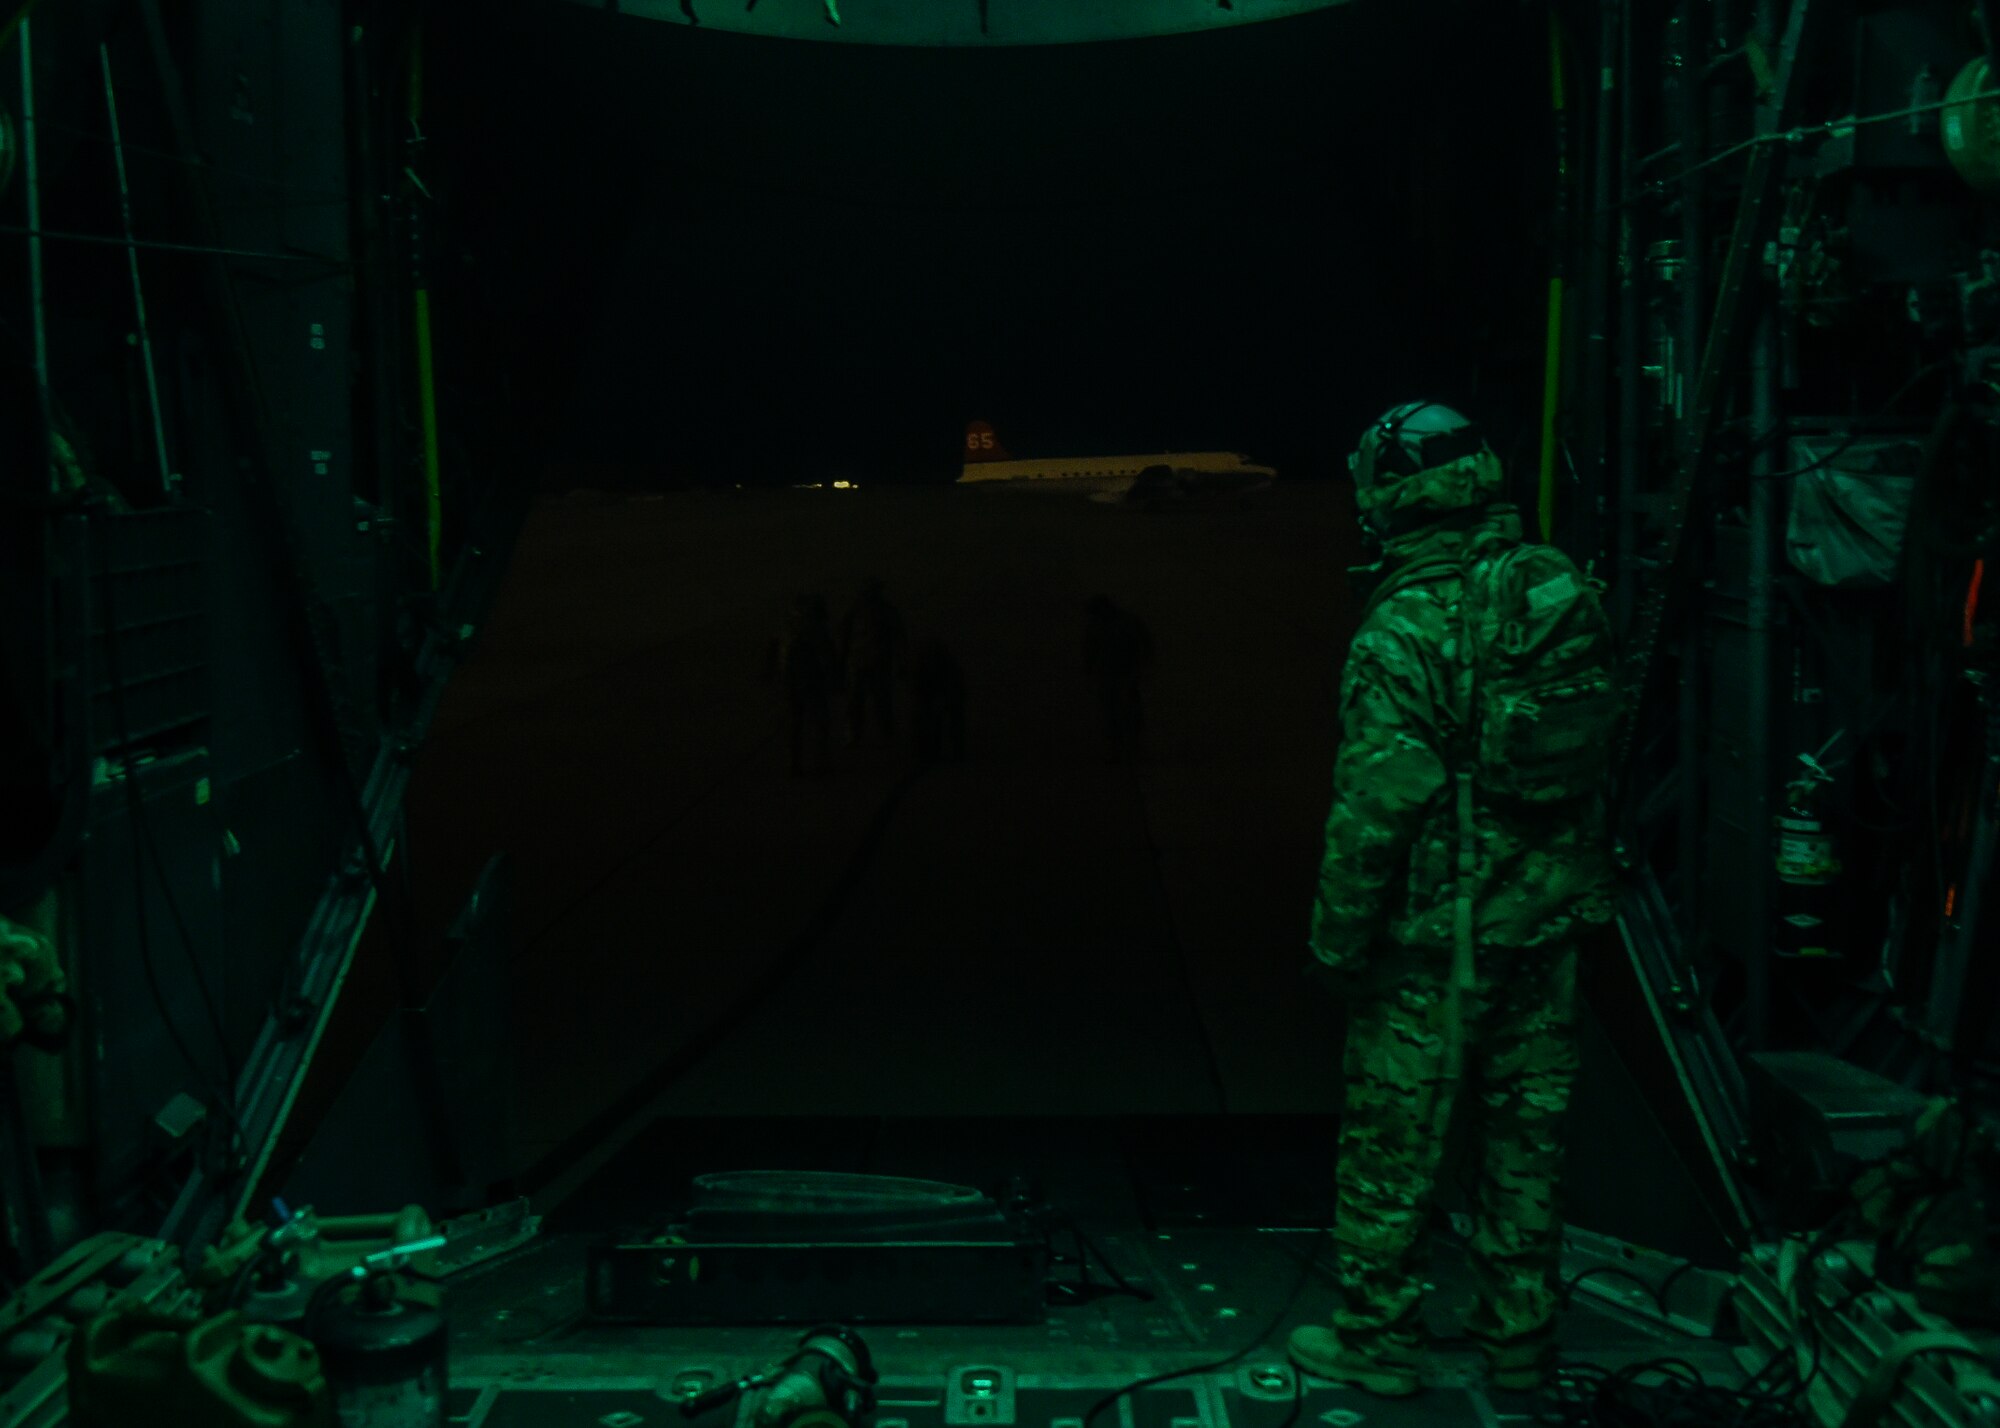 Tech. Sgt. Joseph Montgomery, a loadmaster with the 15th Special Operations Squadron, oversees Airmen breaking down a forward area refueling point at the Utah Test and Training Range, Utah, Nov. 3, 2015. Airmen with the 1st Special Operations Wing practiced various skills required for overseas contingency operations during the exercise. (U.S. Air Force photo by Airman Kai White)